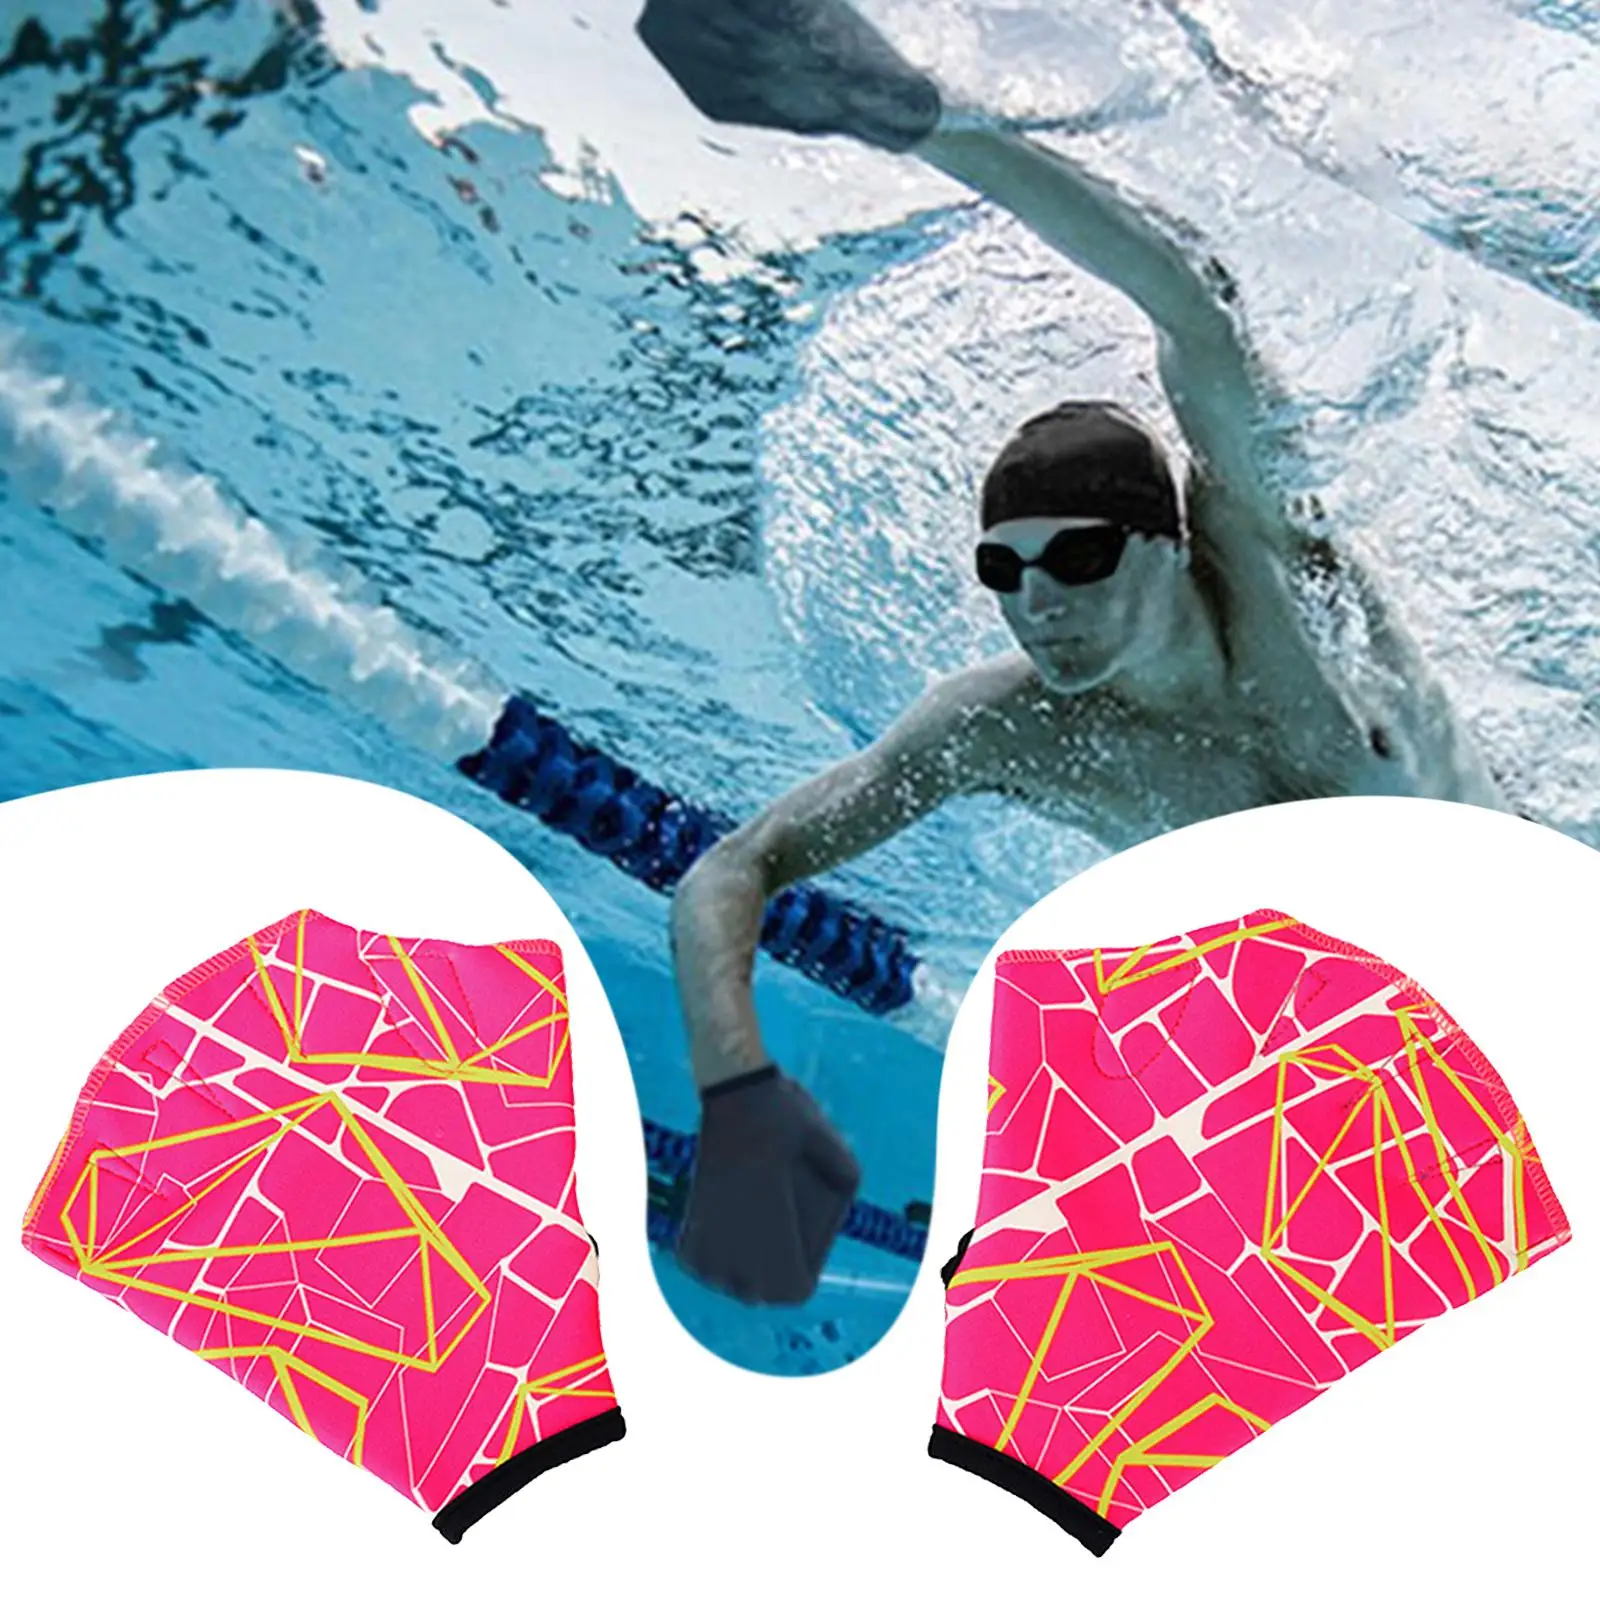 Swimming Foot Snorkeling Floating Training Diving Water Sports